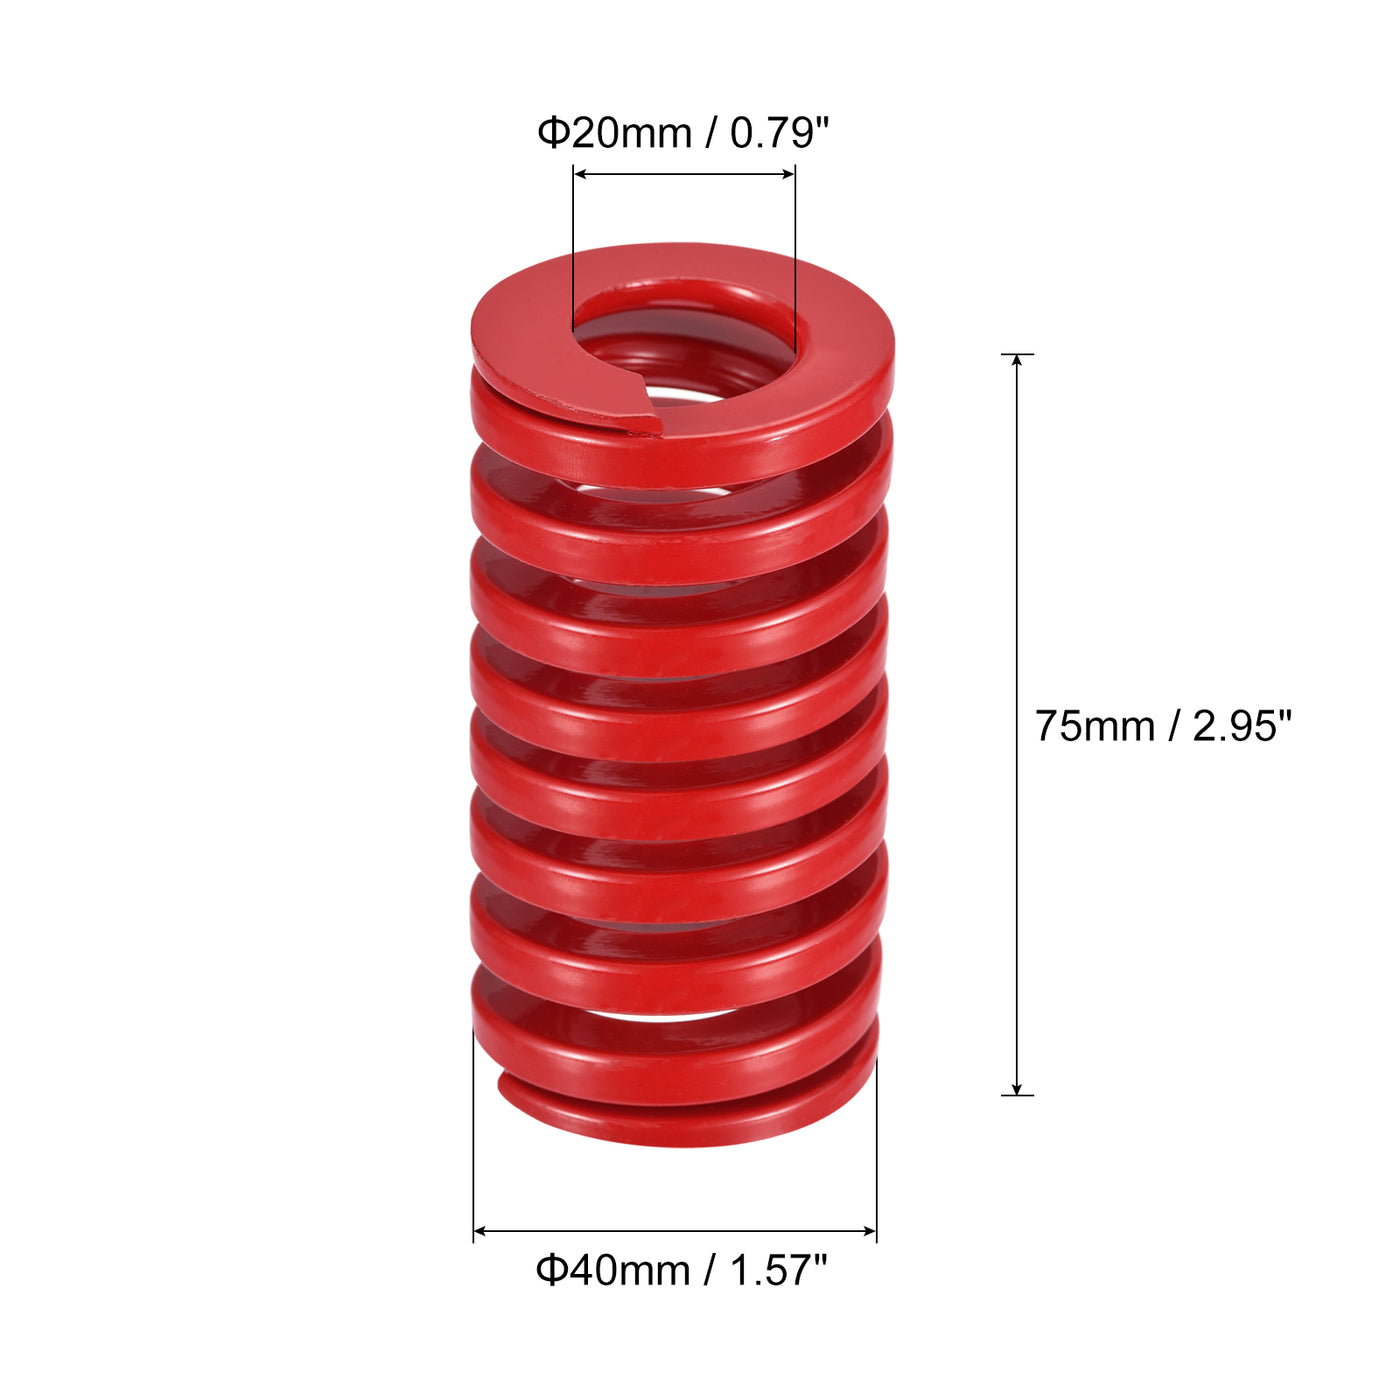 uxcell Uxcell Die Spring, 2pcs 40mm OD 75mm Long Spiral Stamping Medium Load Compression, Red